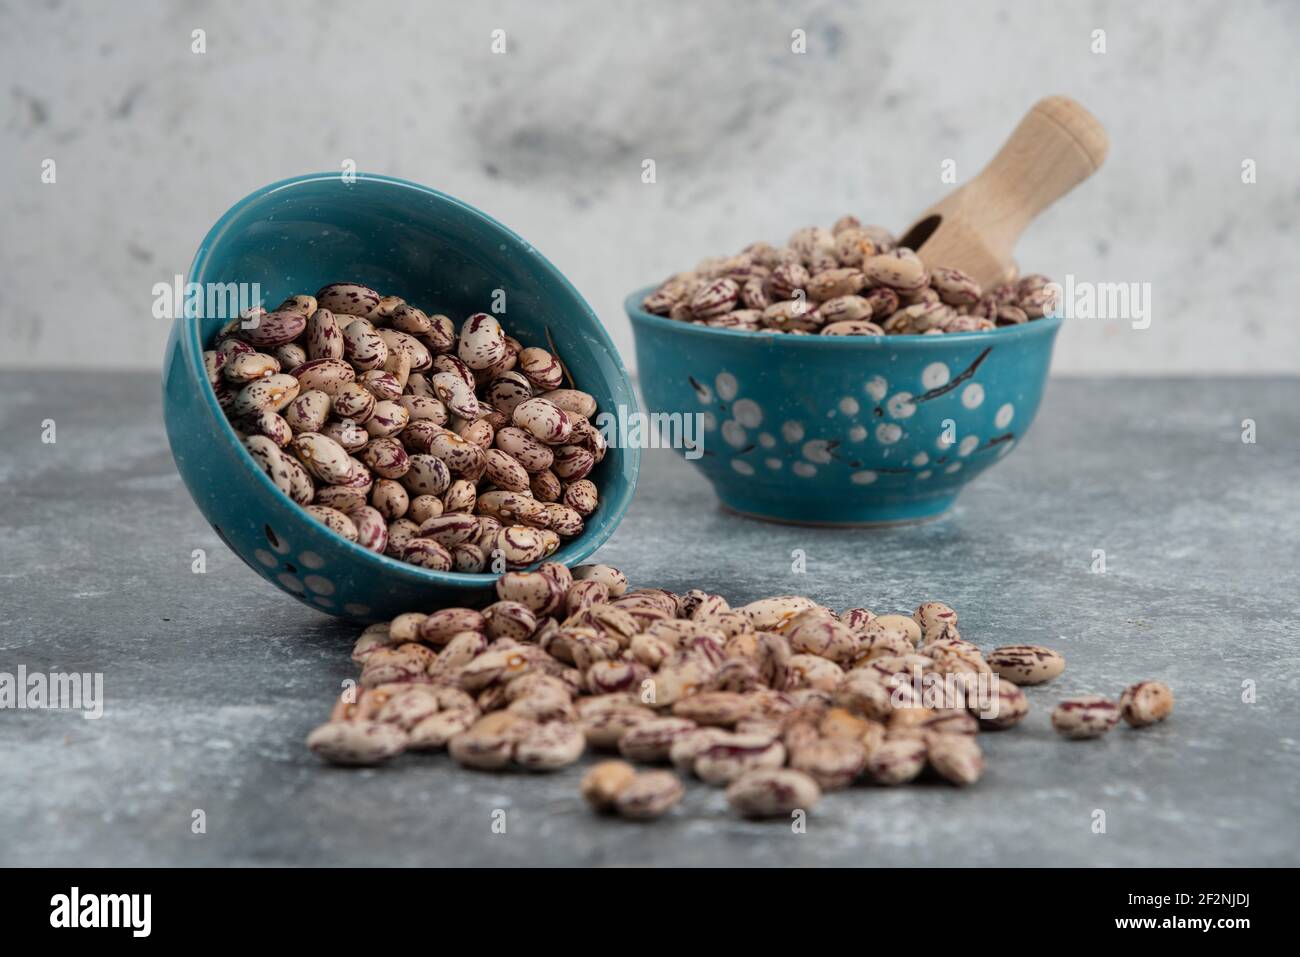 Raw bean grains displayed in bowls on marble surface Stock Photo